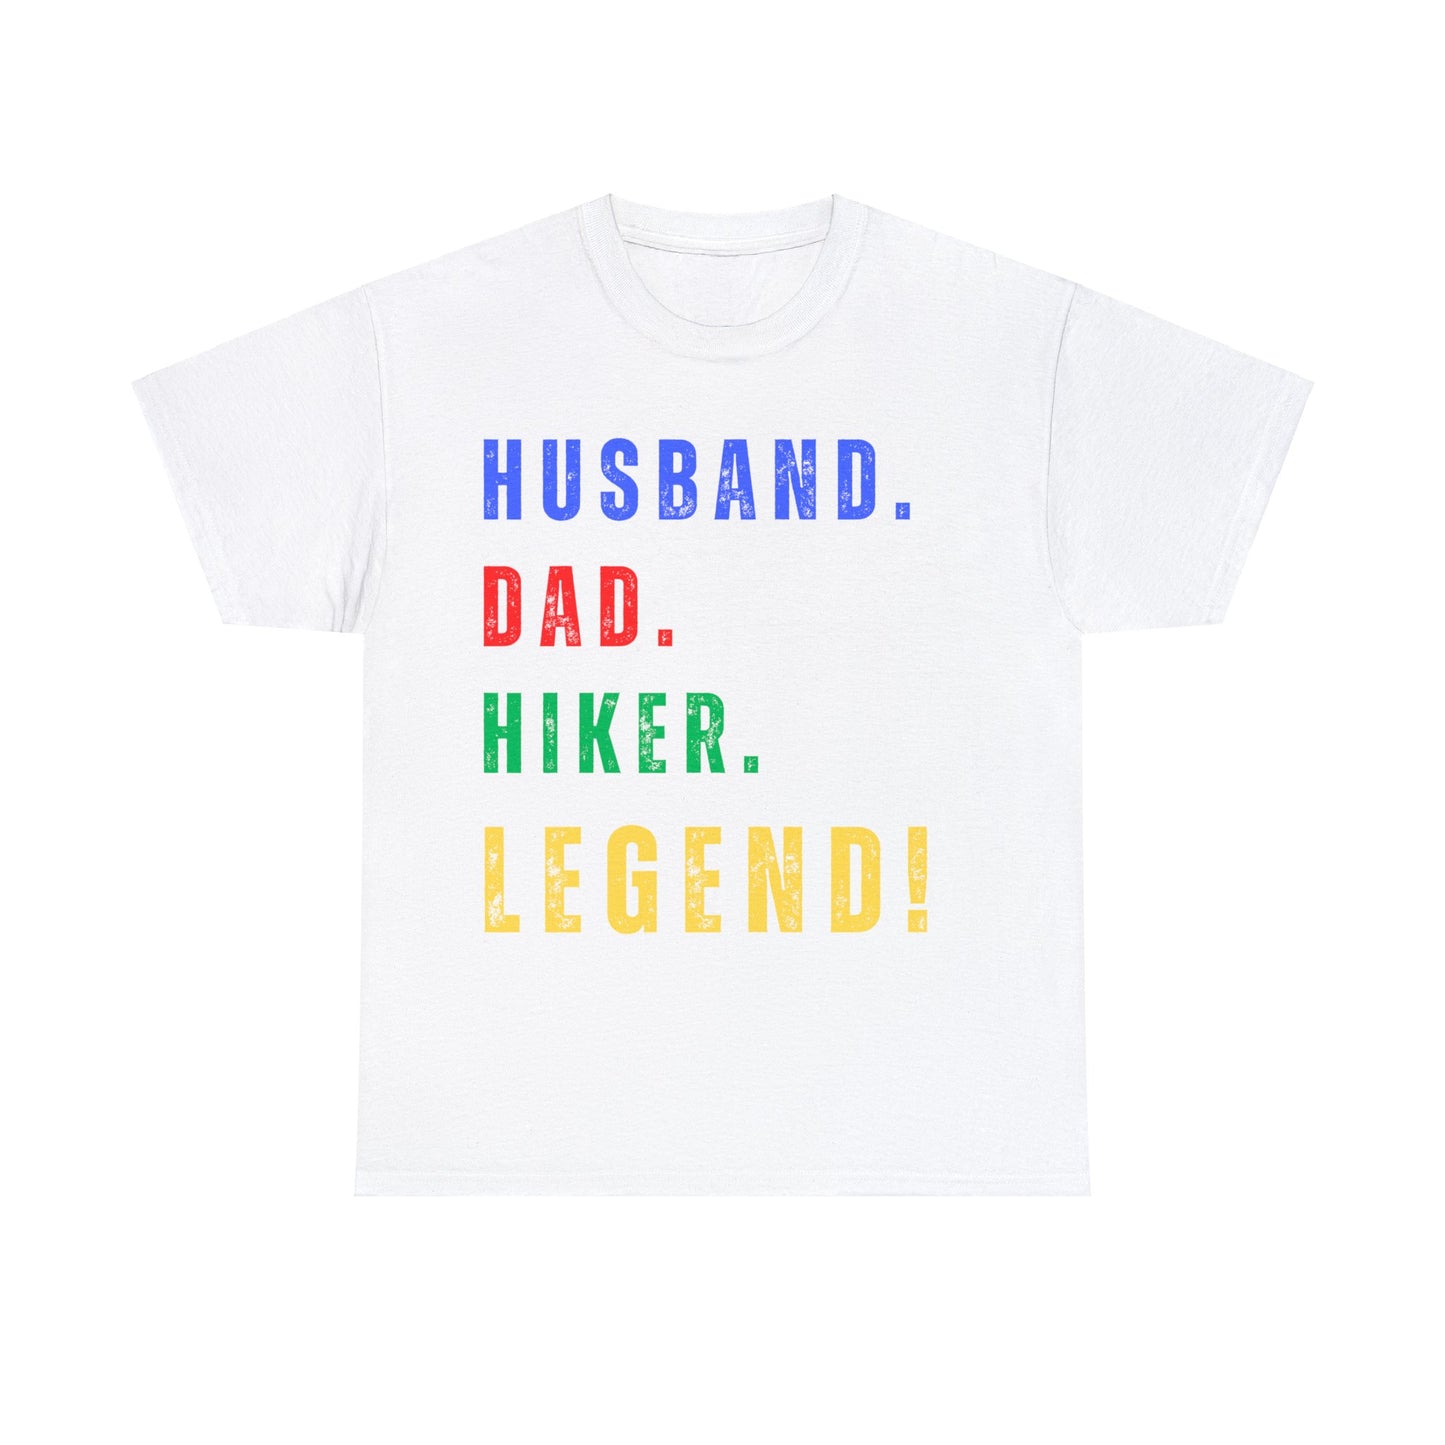 HUSBAND. DAD. HIKER. LEGEND. T-Shirt - UNIQUE GIFT - NOT SOLD IN STORES - Father's Day, Birthday - Hiker, Trekker, Adventurer, Hiking, Trekking, Adventure Lover Express Delivery available